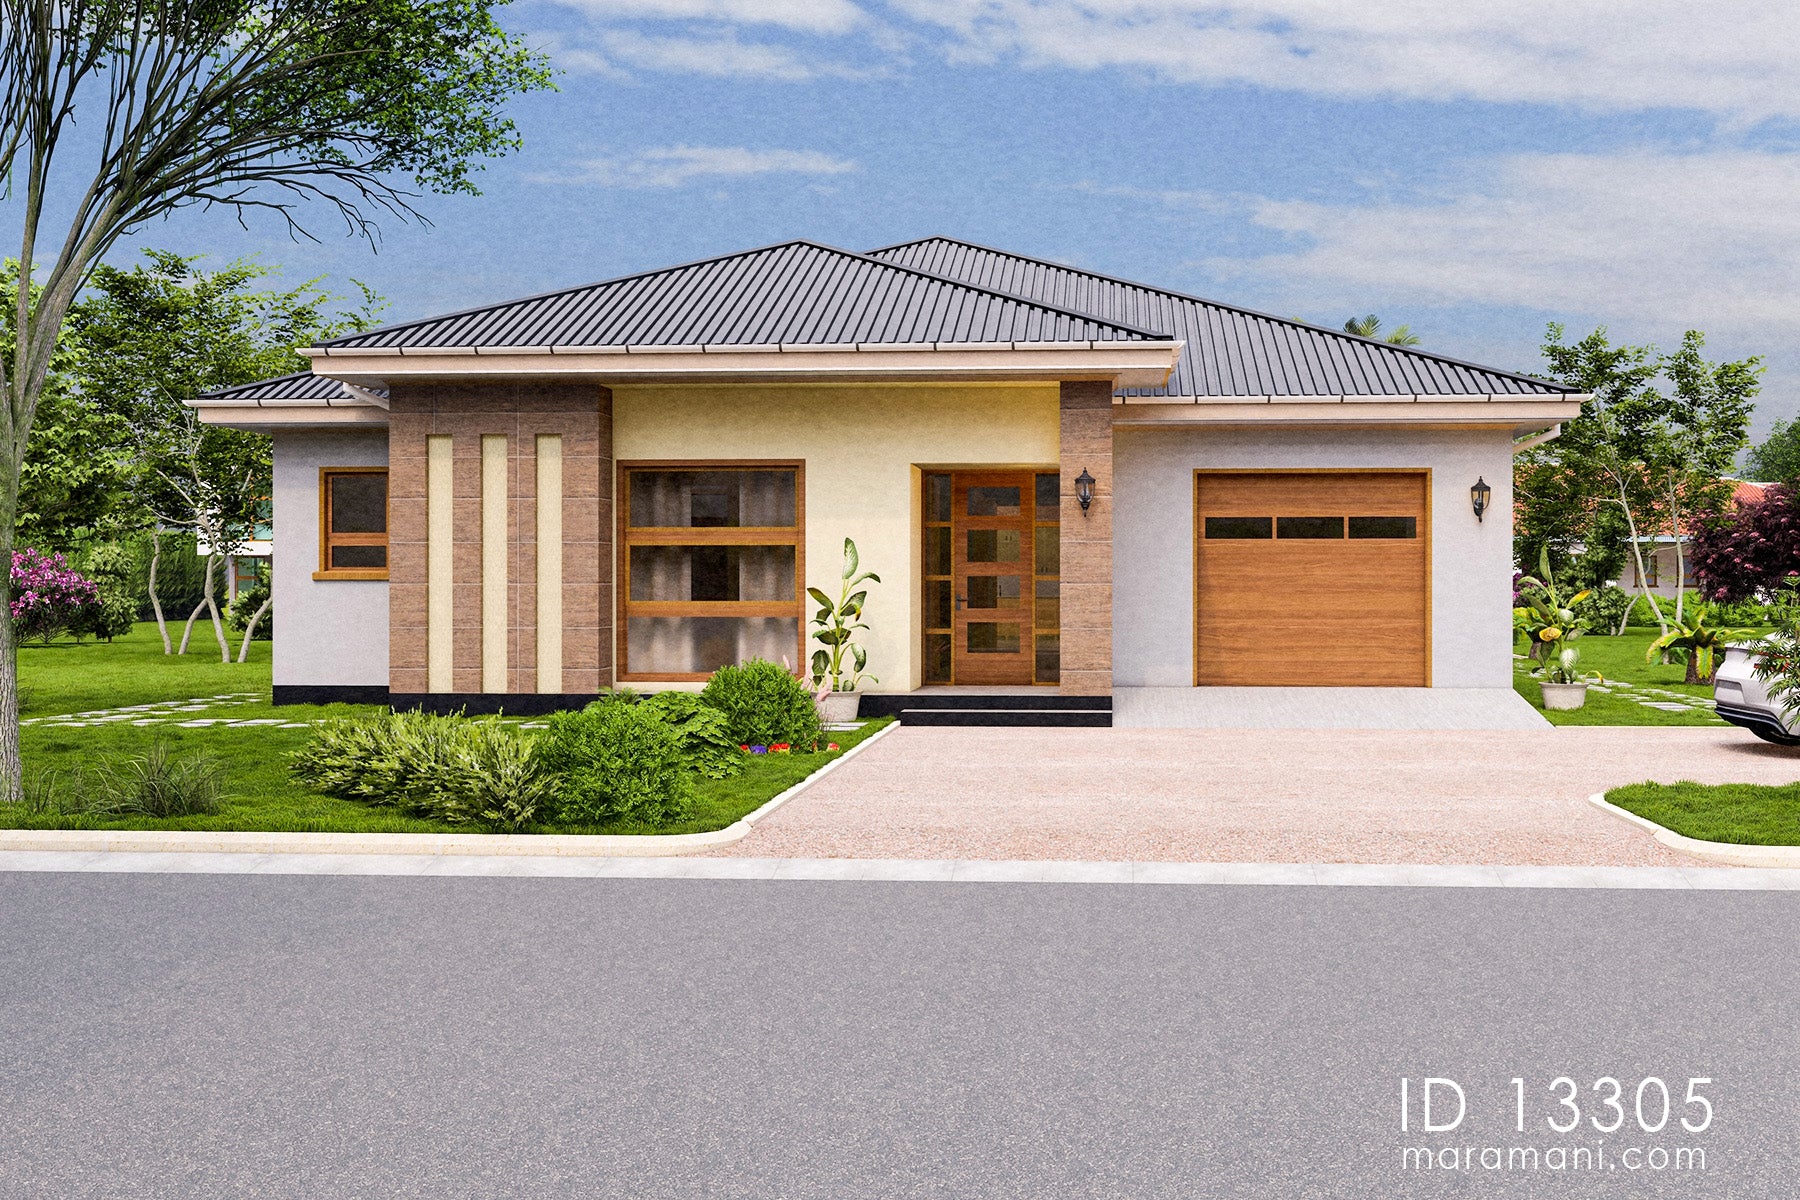 A 3 Bedroom House Design Id 13305